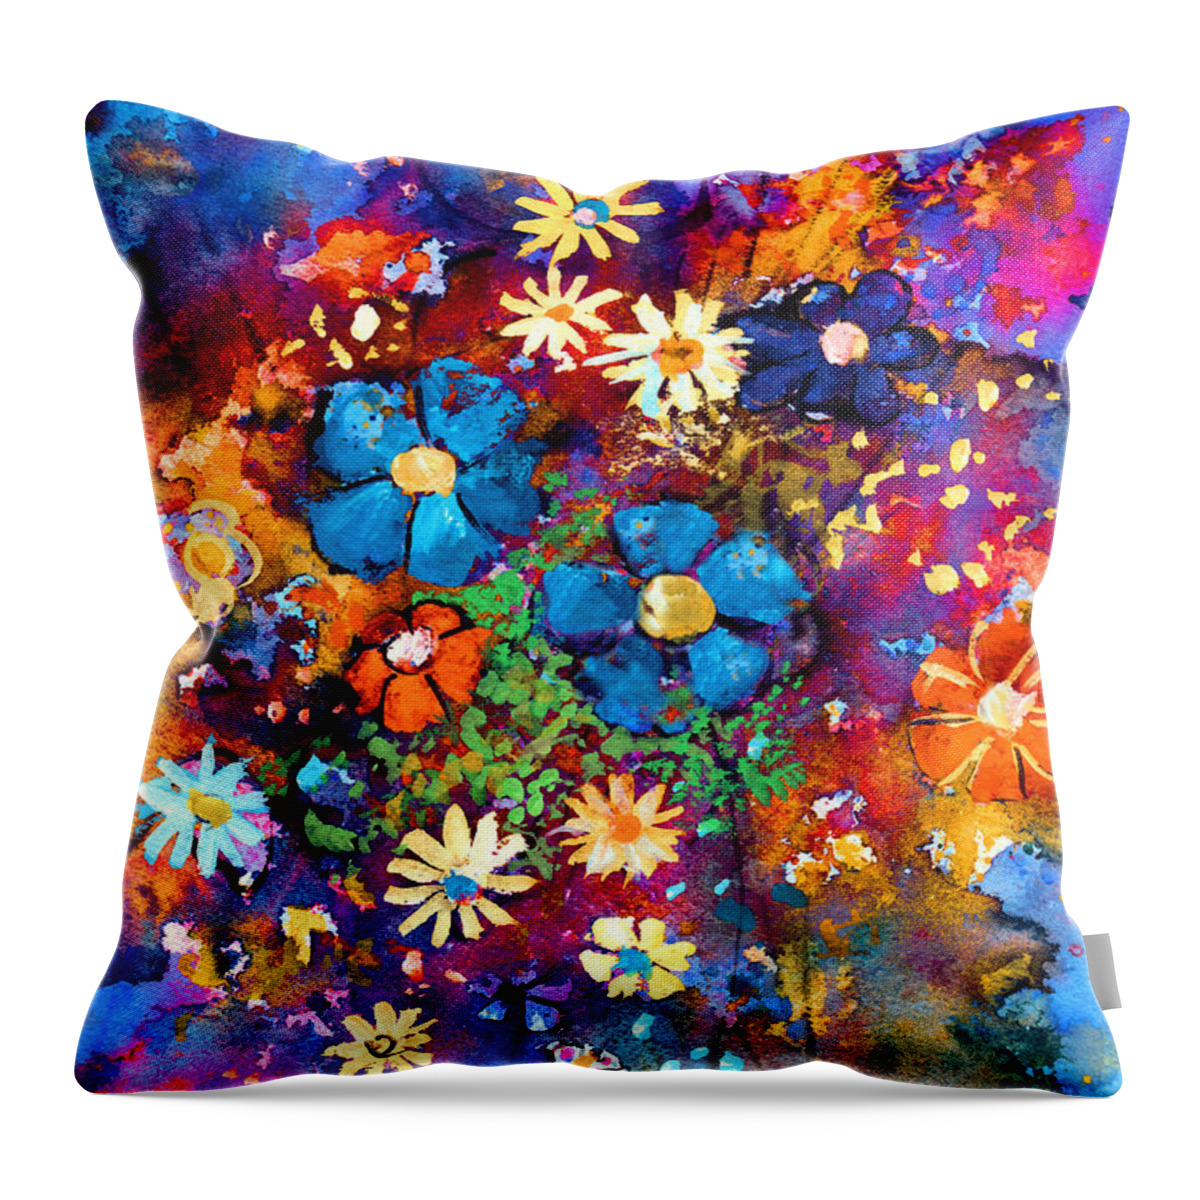 Abstract Floral Art Throw Pillow featuring the painting Floral dance fantasy by Svetlana Novikova